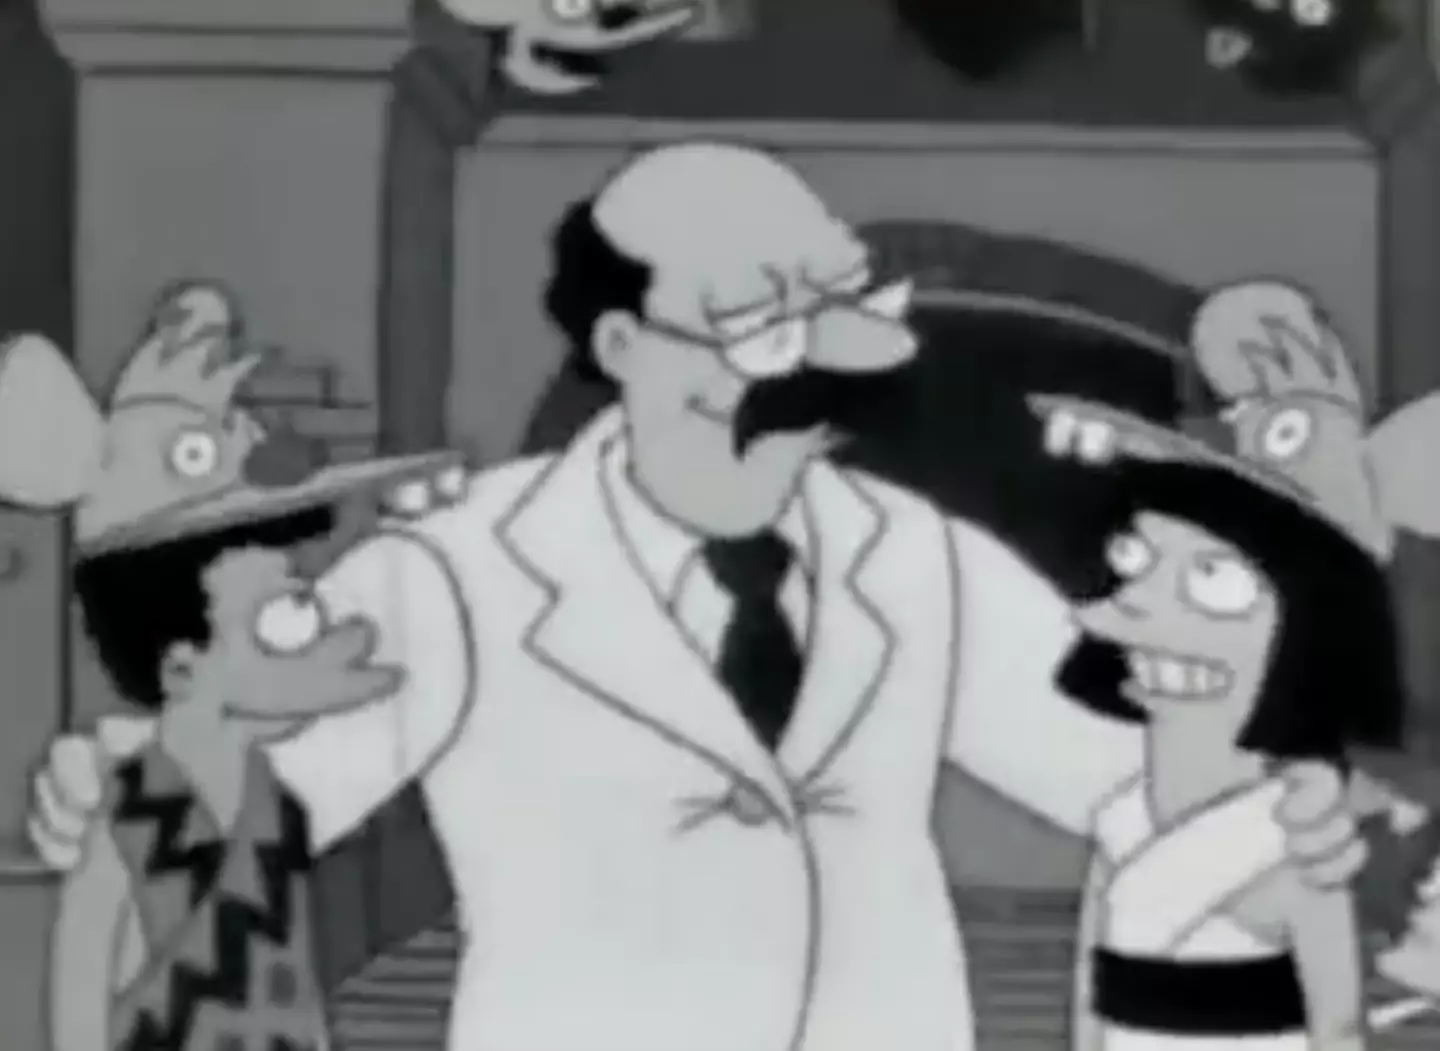 Fans of The Simpsons are shocked by the 'Nazi Supermen' scene.